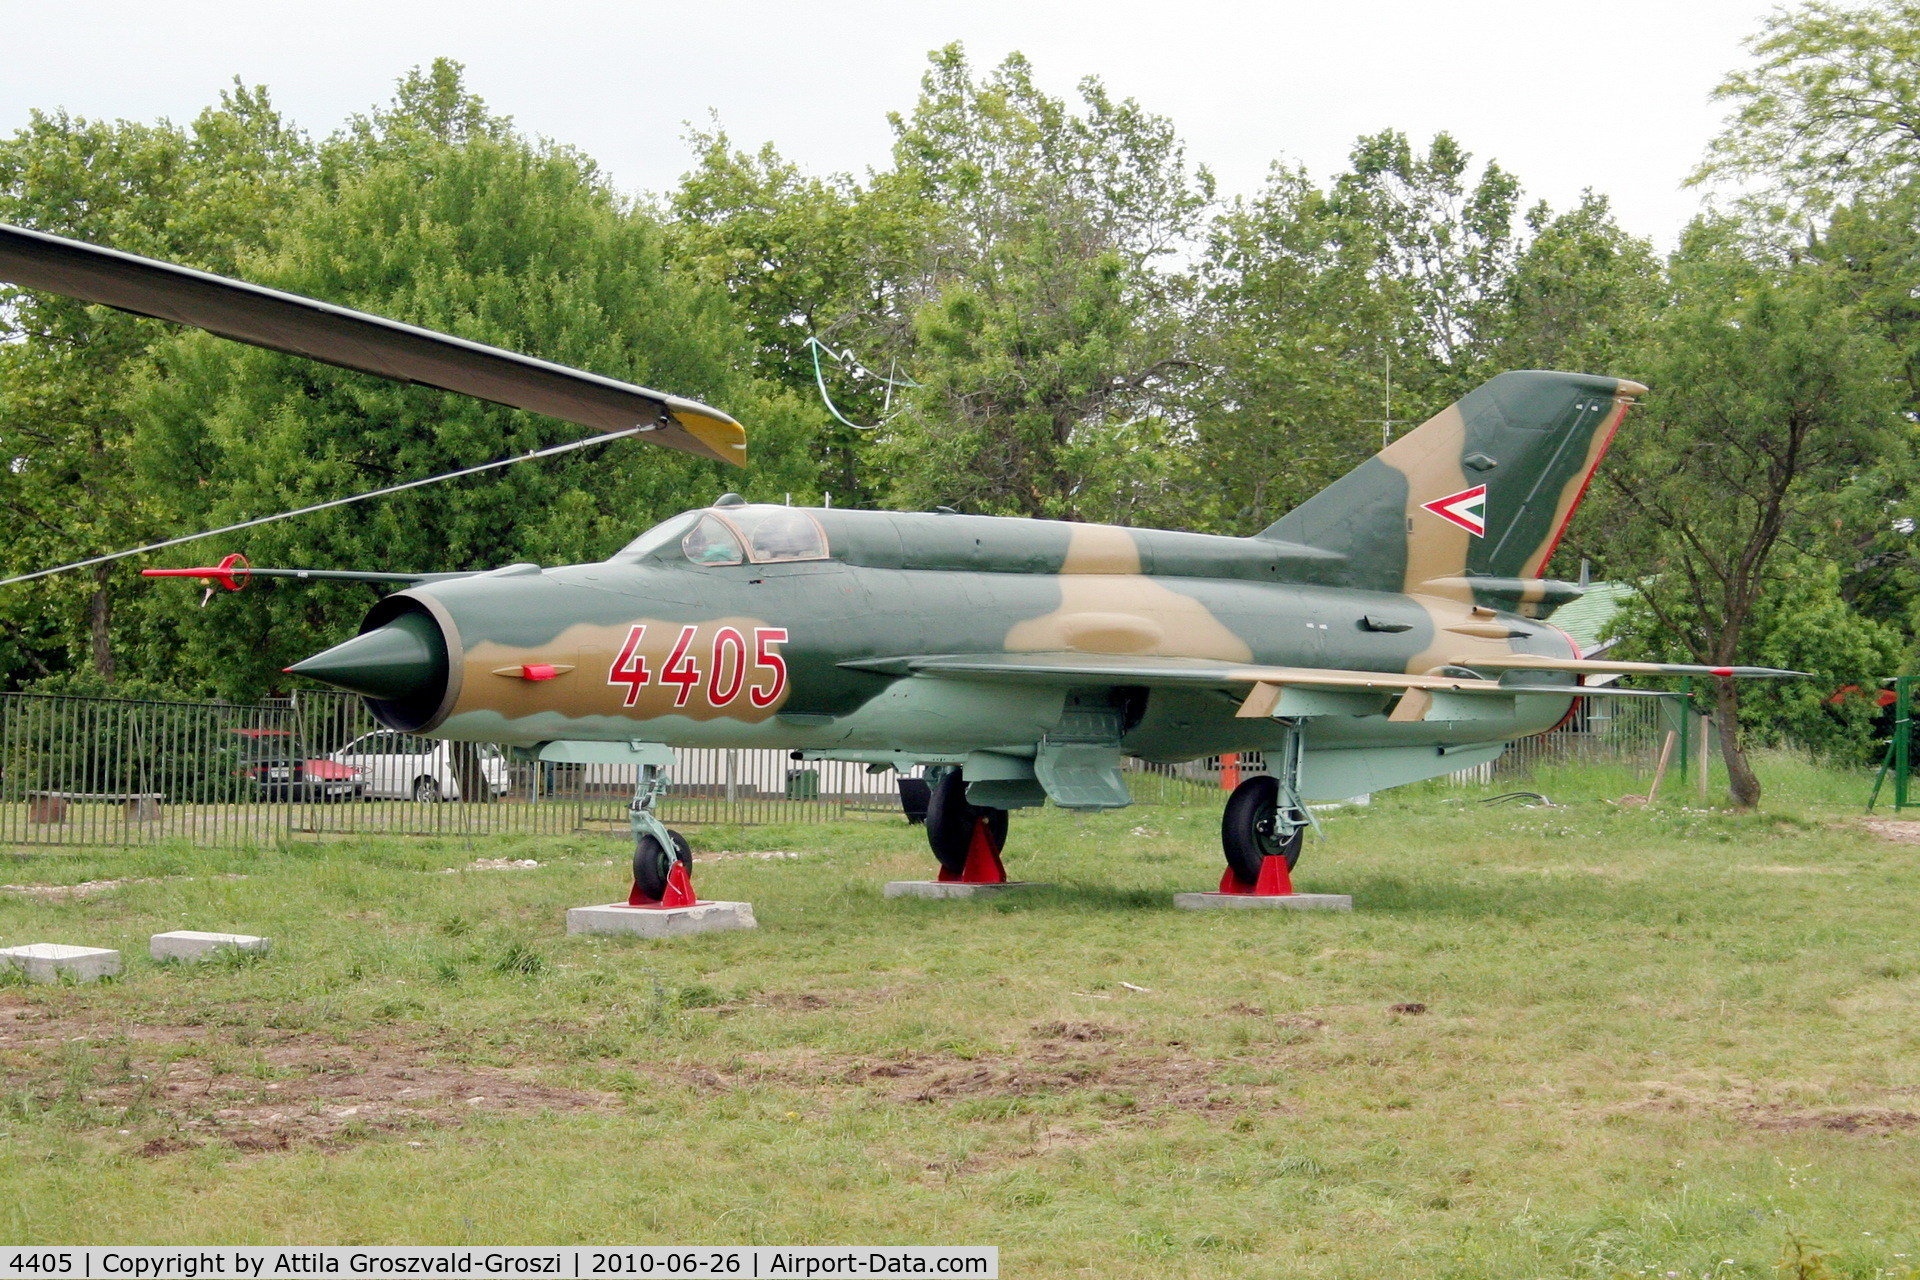 4405, 1971 Mikoyan-Gurevich MiG-21MF C/N 964405, Exhibited in a military technical park created in the children's town on Zánka.